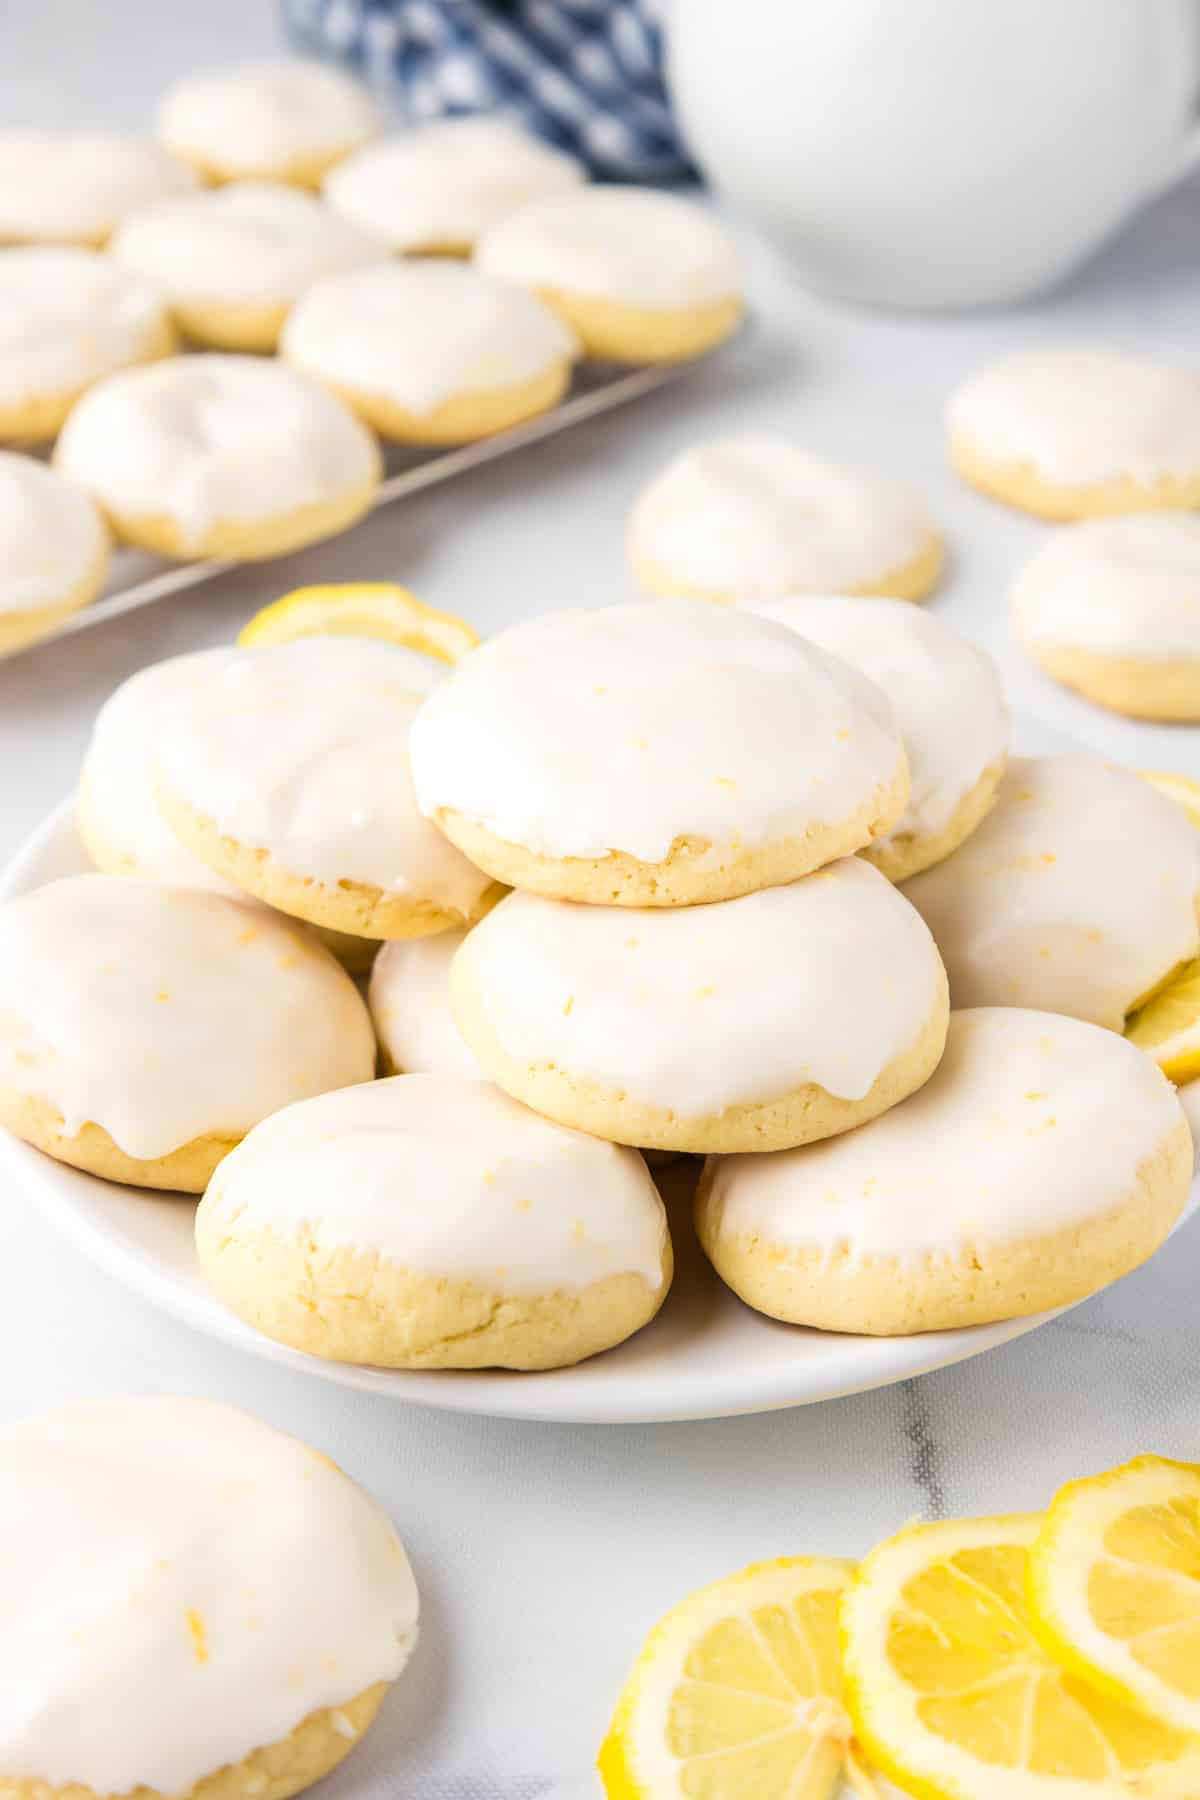 Lemon cookies with glaze on a plate with lemon slices and more cookies on the counter in the background.